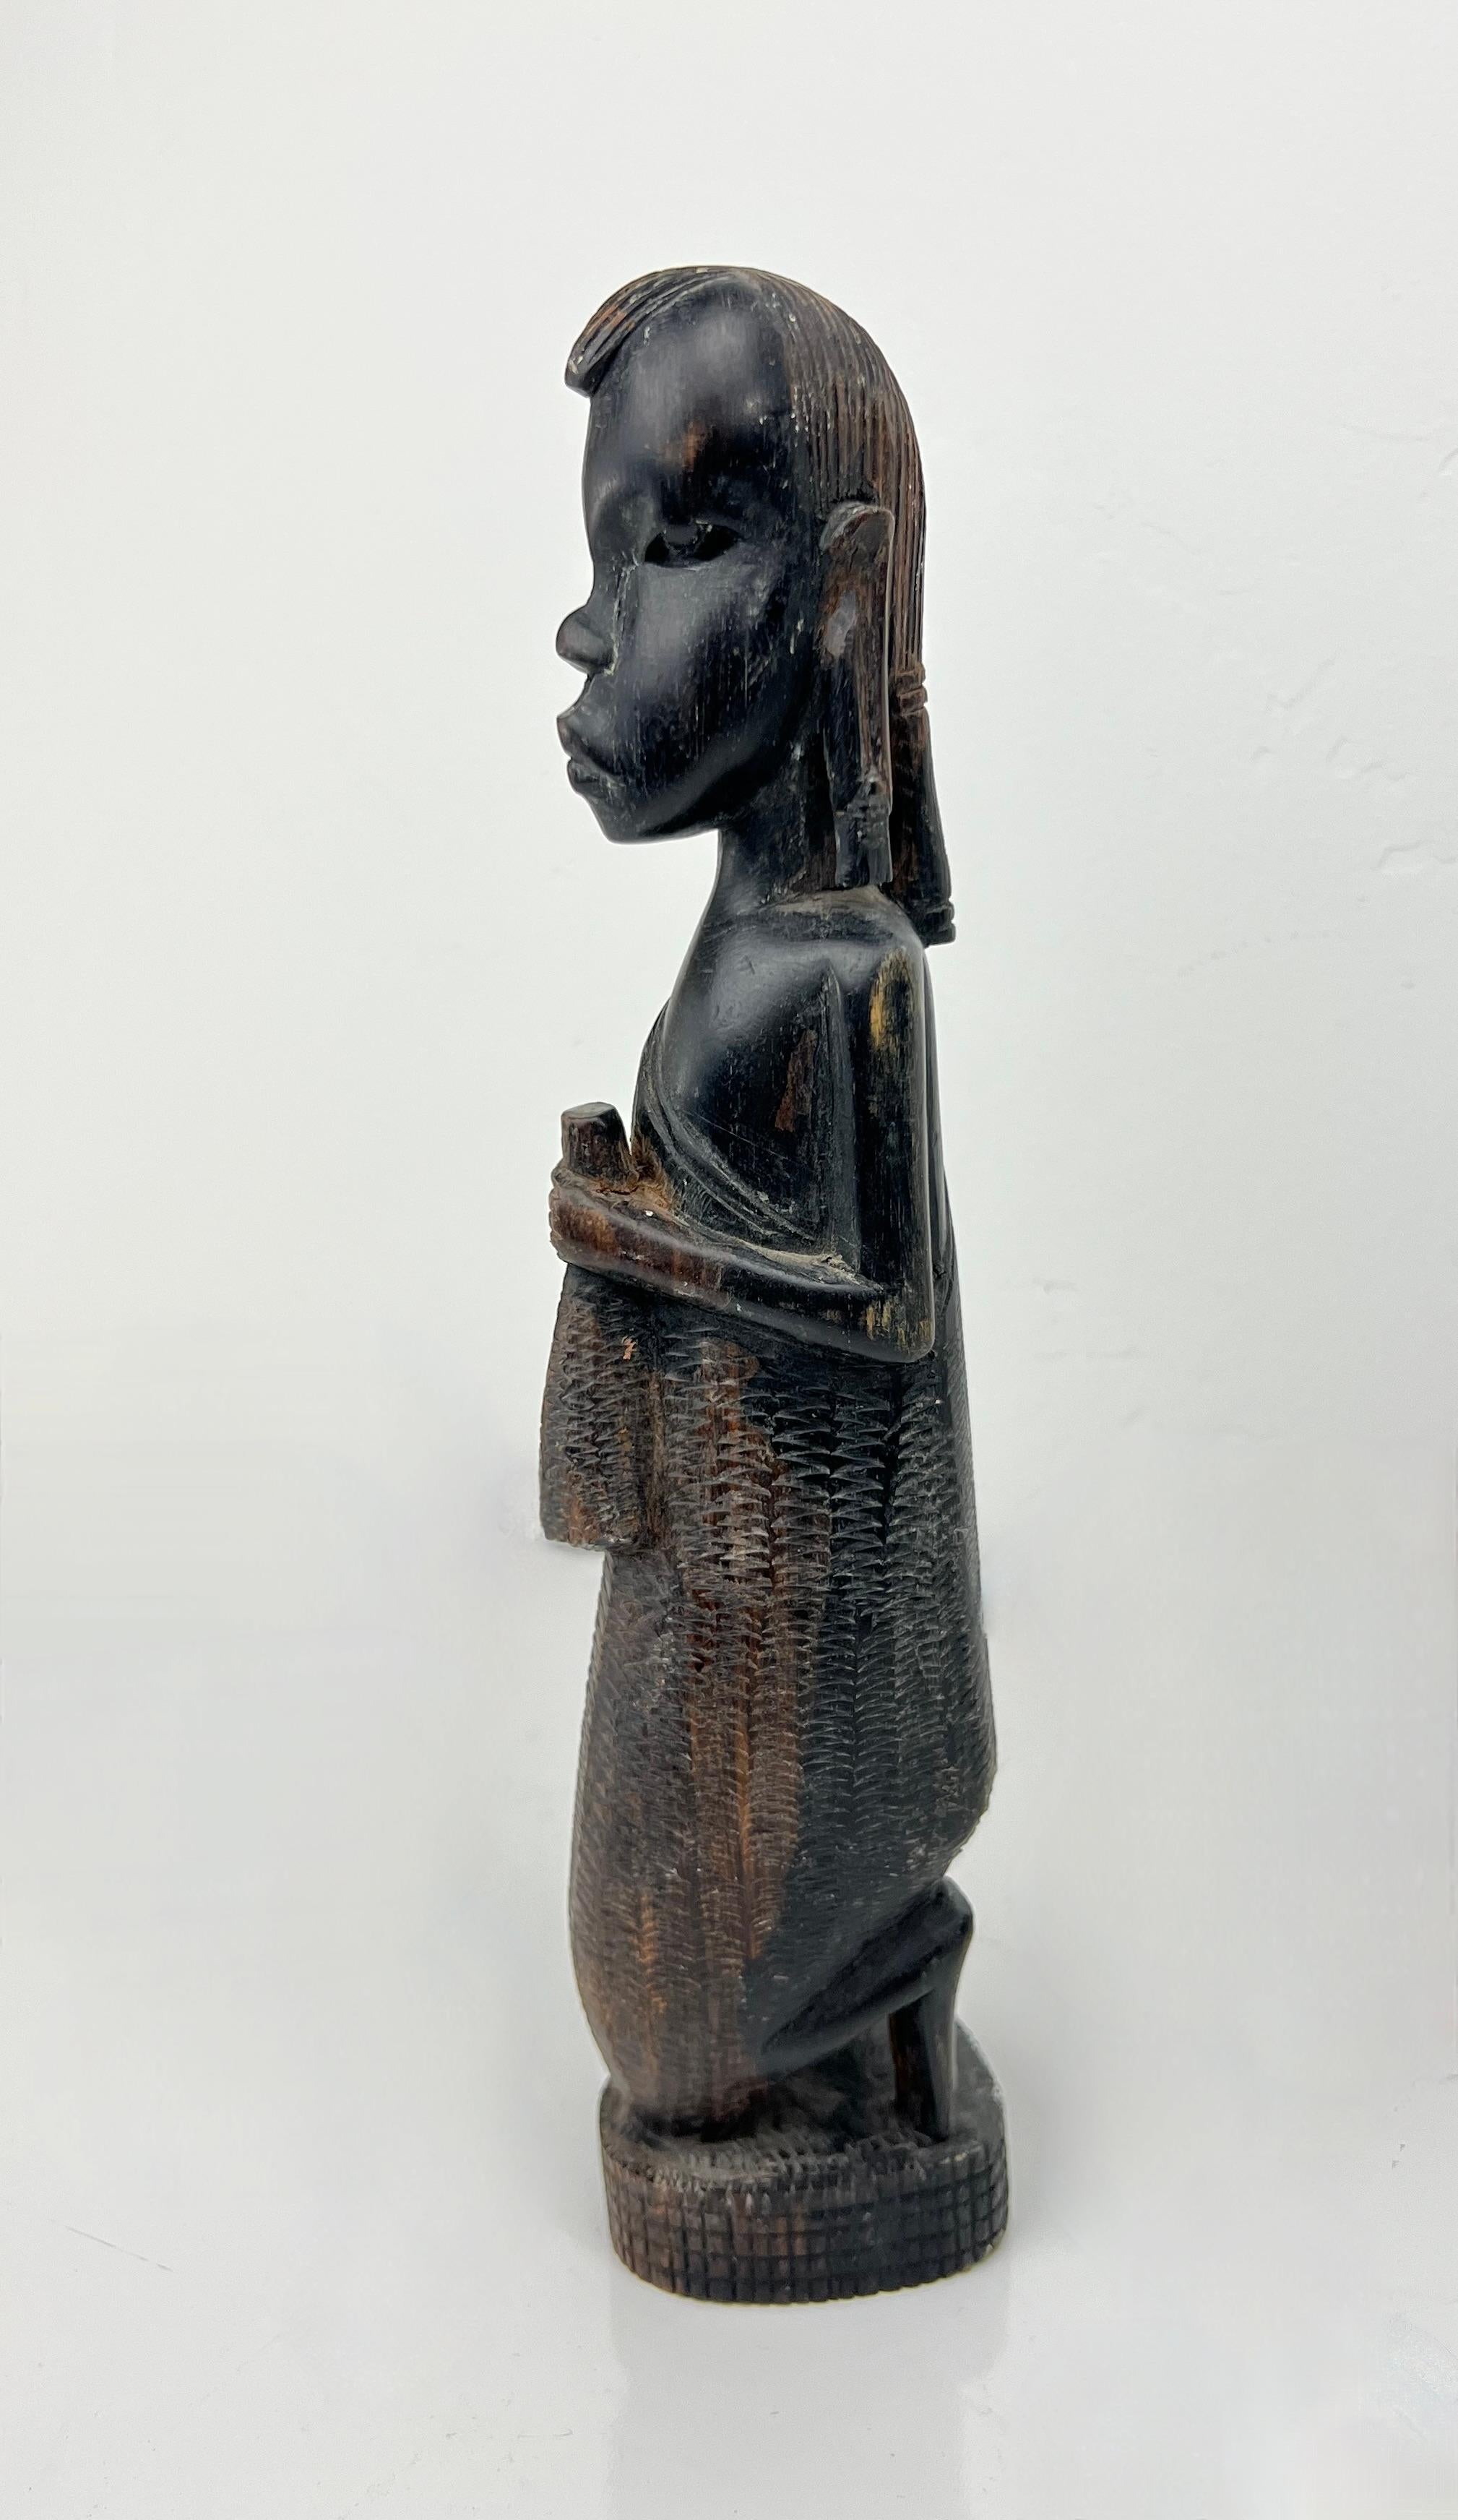 Hand-Carved African Sculpture of Kneeling Male made of Dark Wood.  Hand-carved in Kenya. This carving is gorgeously detailed with a smooth sculpted face, hair tied back and ears adorned with long earrings.  The tribal male appears to be holding a